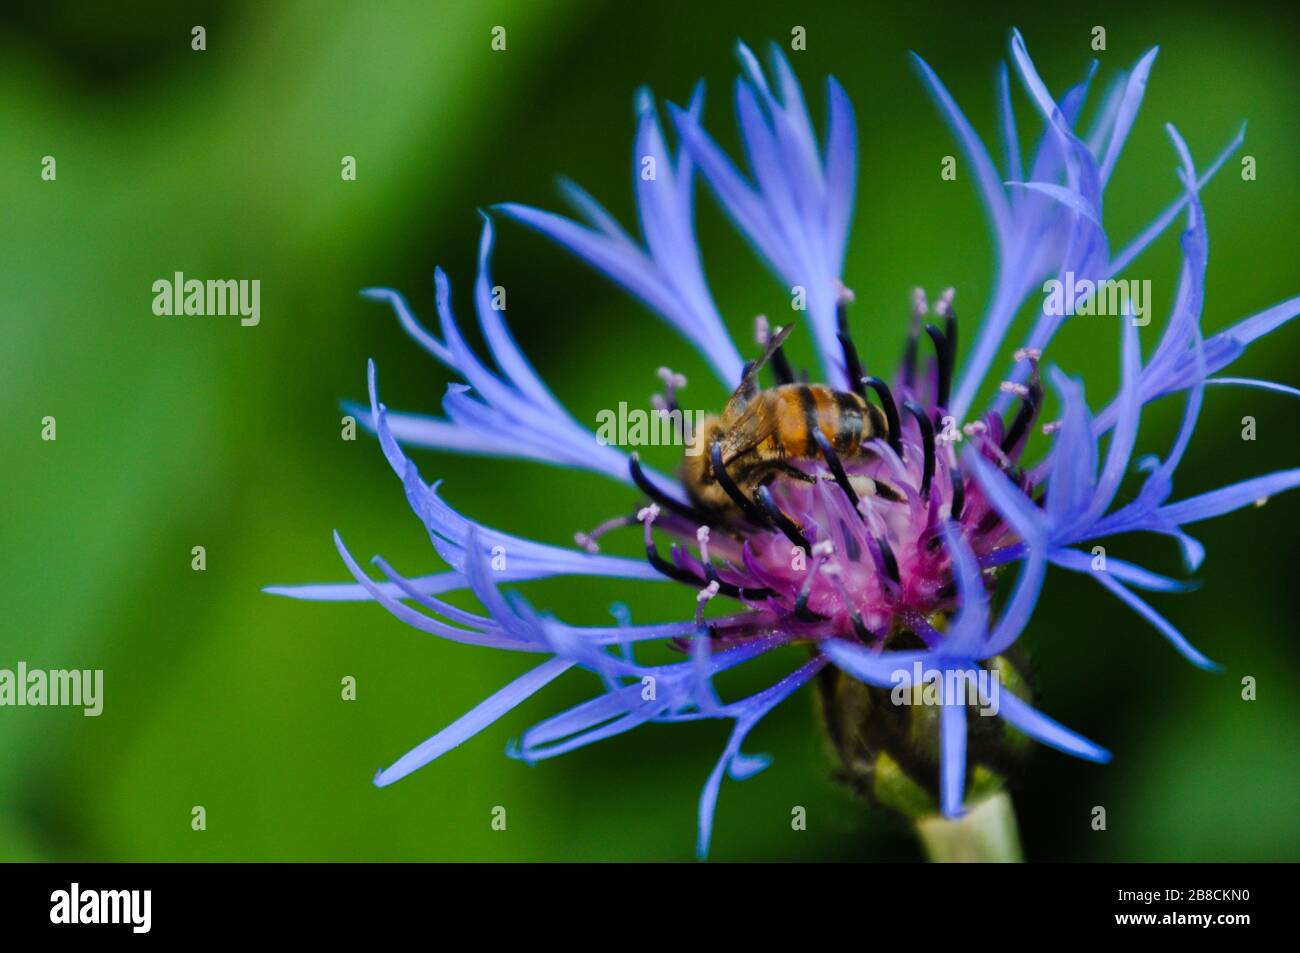 A bee pollinates flower of knapweed in the garden. Stock Photo